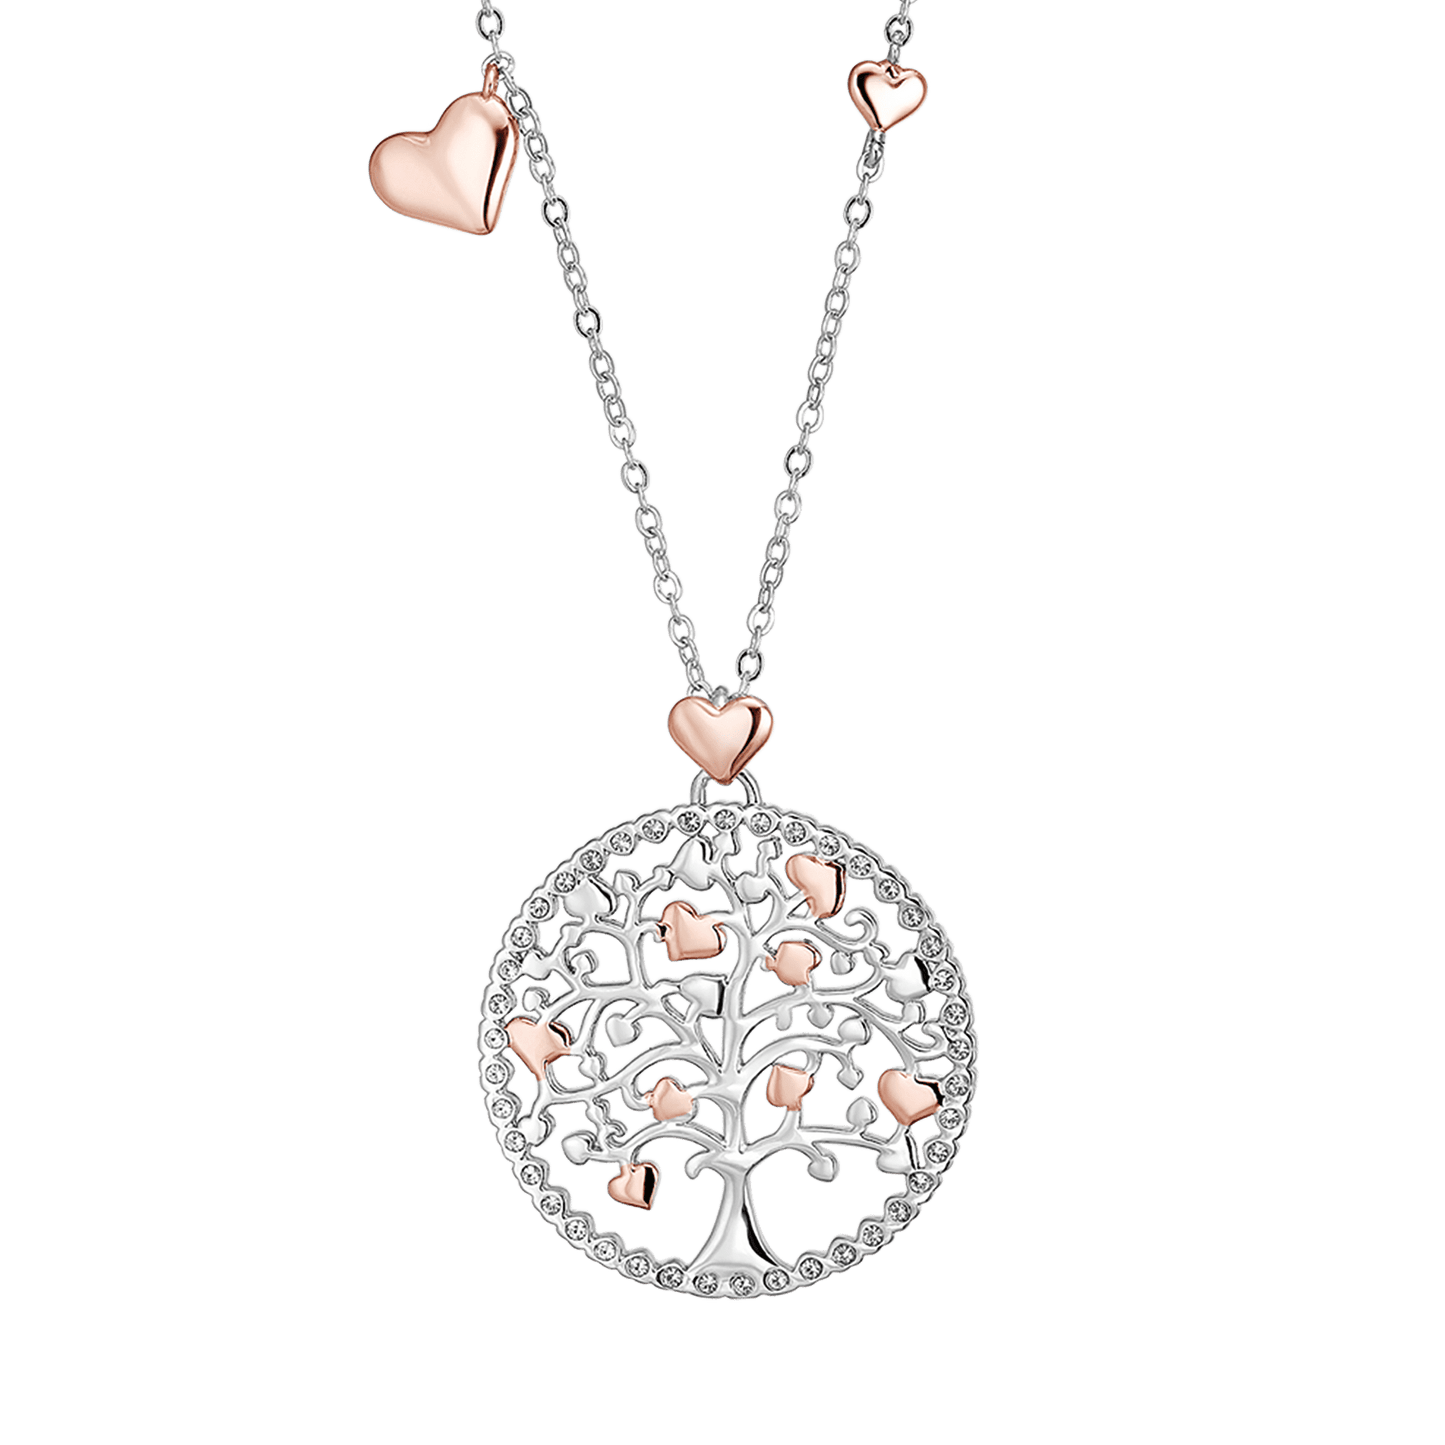 WOMEN'S LONG STEEL TREE OF LIFE NECKLACE WITH ROSE ELEMENTS'